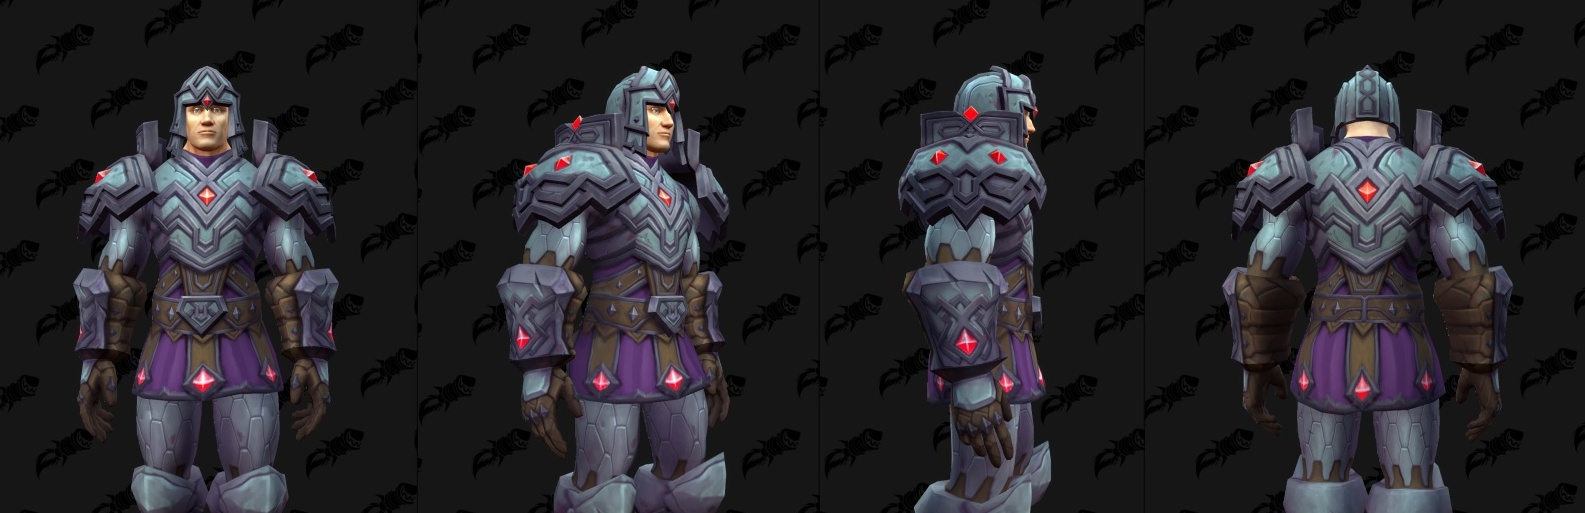 Earthen Dungeon Armor and Weapon Models in The War Within thumbnail